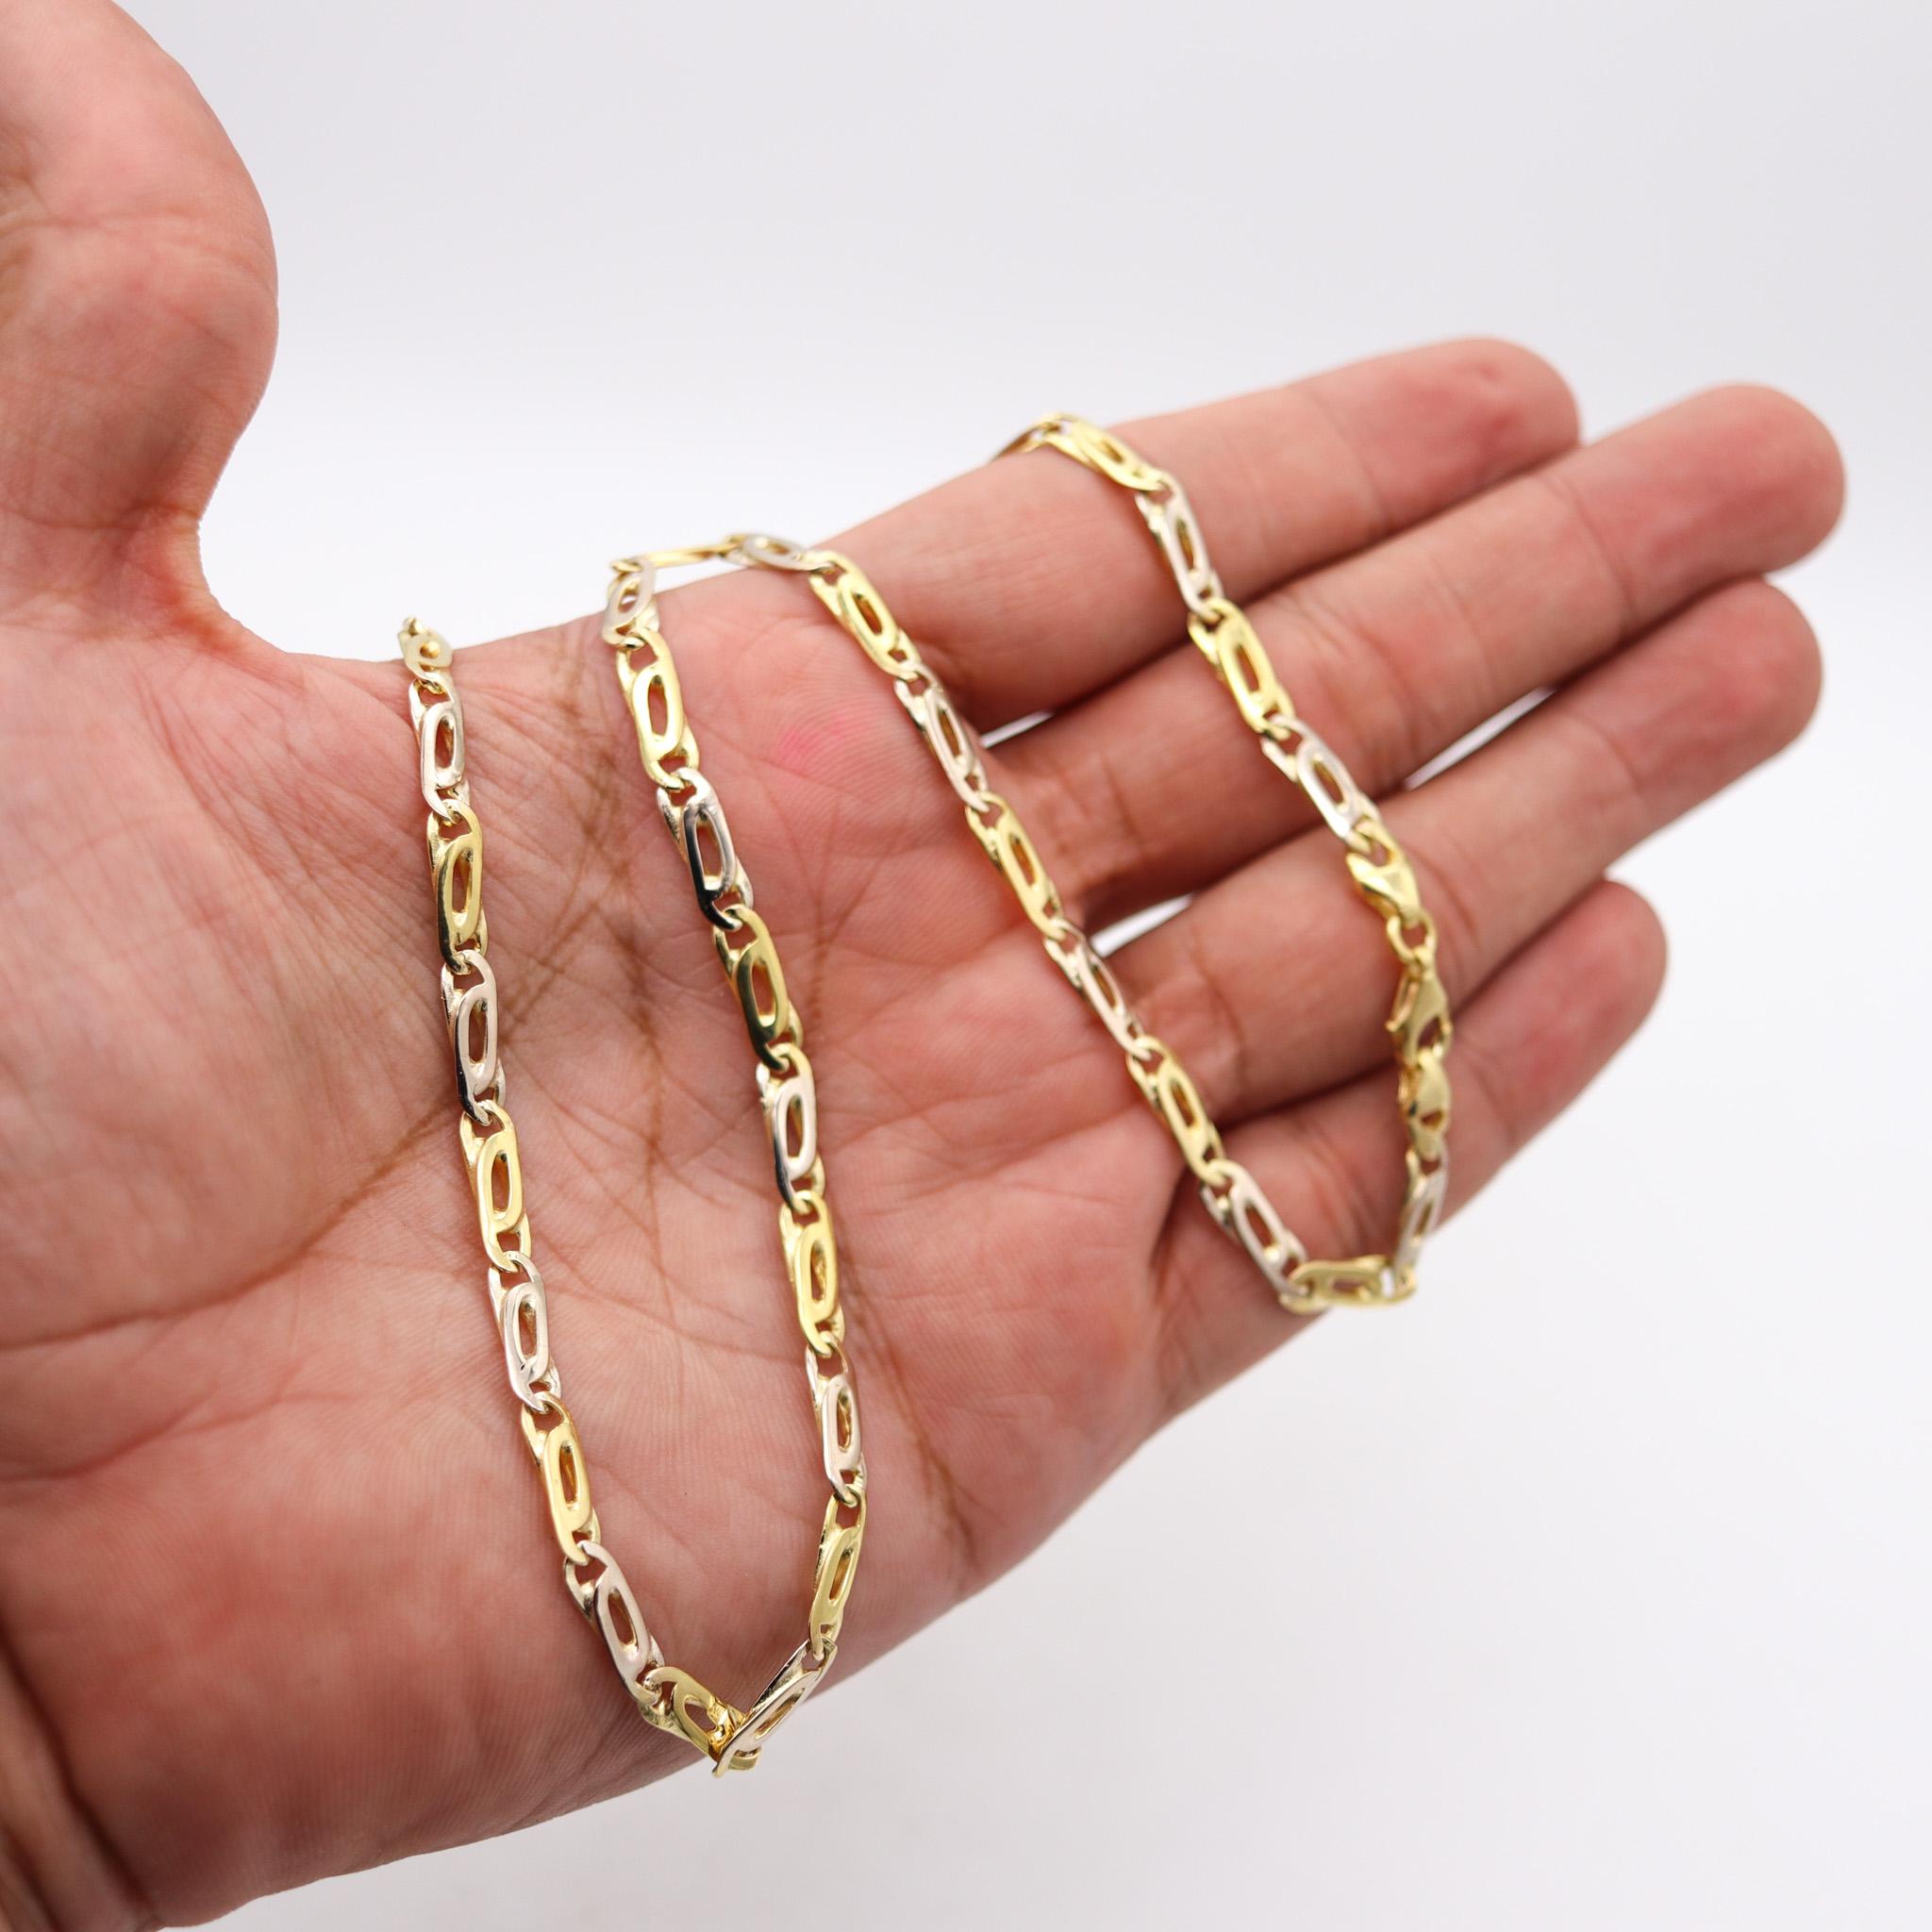 Italian Modernist Two Tones Links Chain in Solid 18Kt White And Yellow Gold For Sale 2